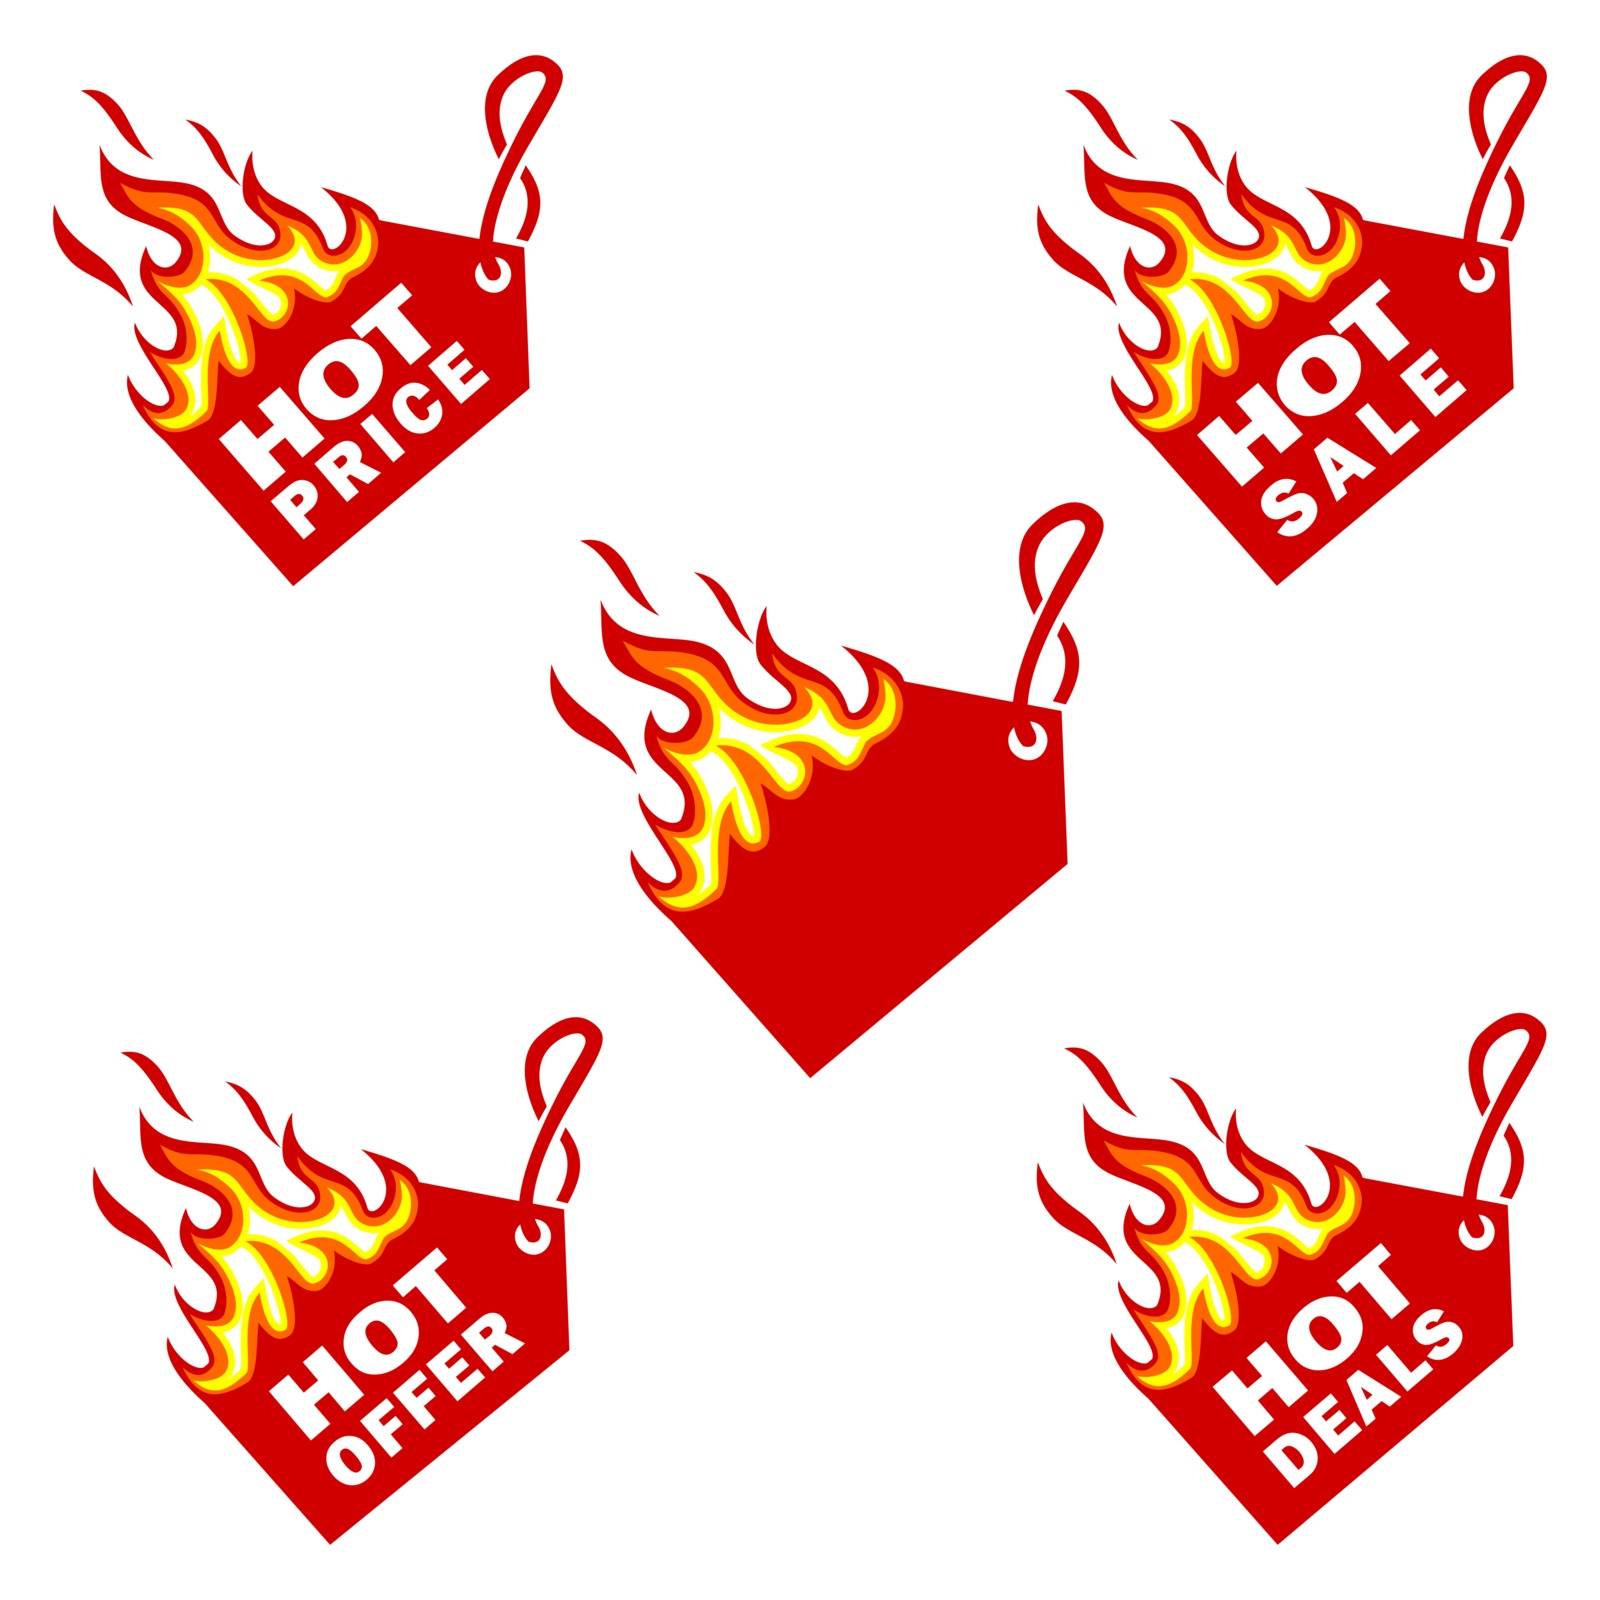 Hot Price and Hot Deal labels, Flame Tags sale promotion design templatefire logo2 by denayuneyi